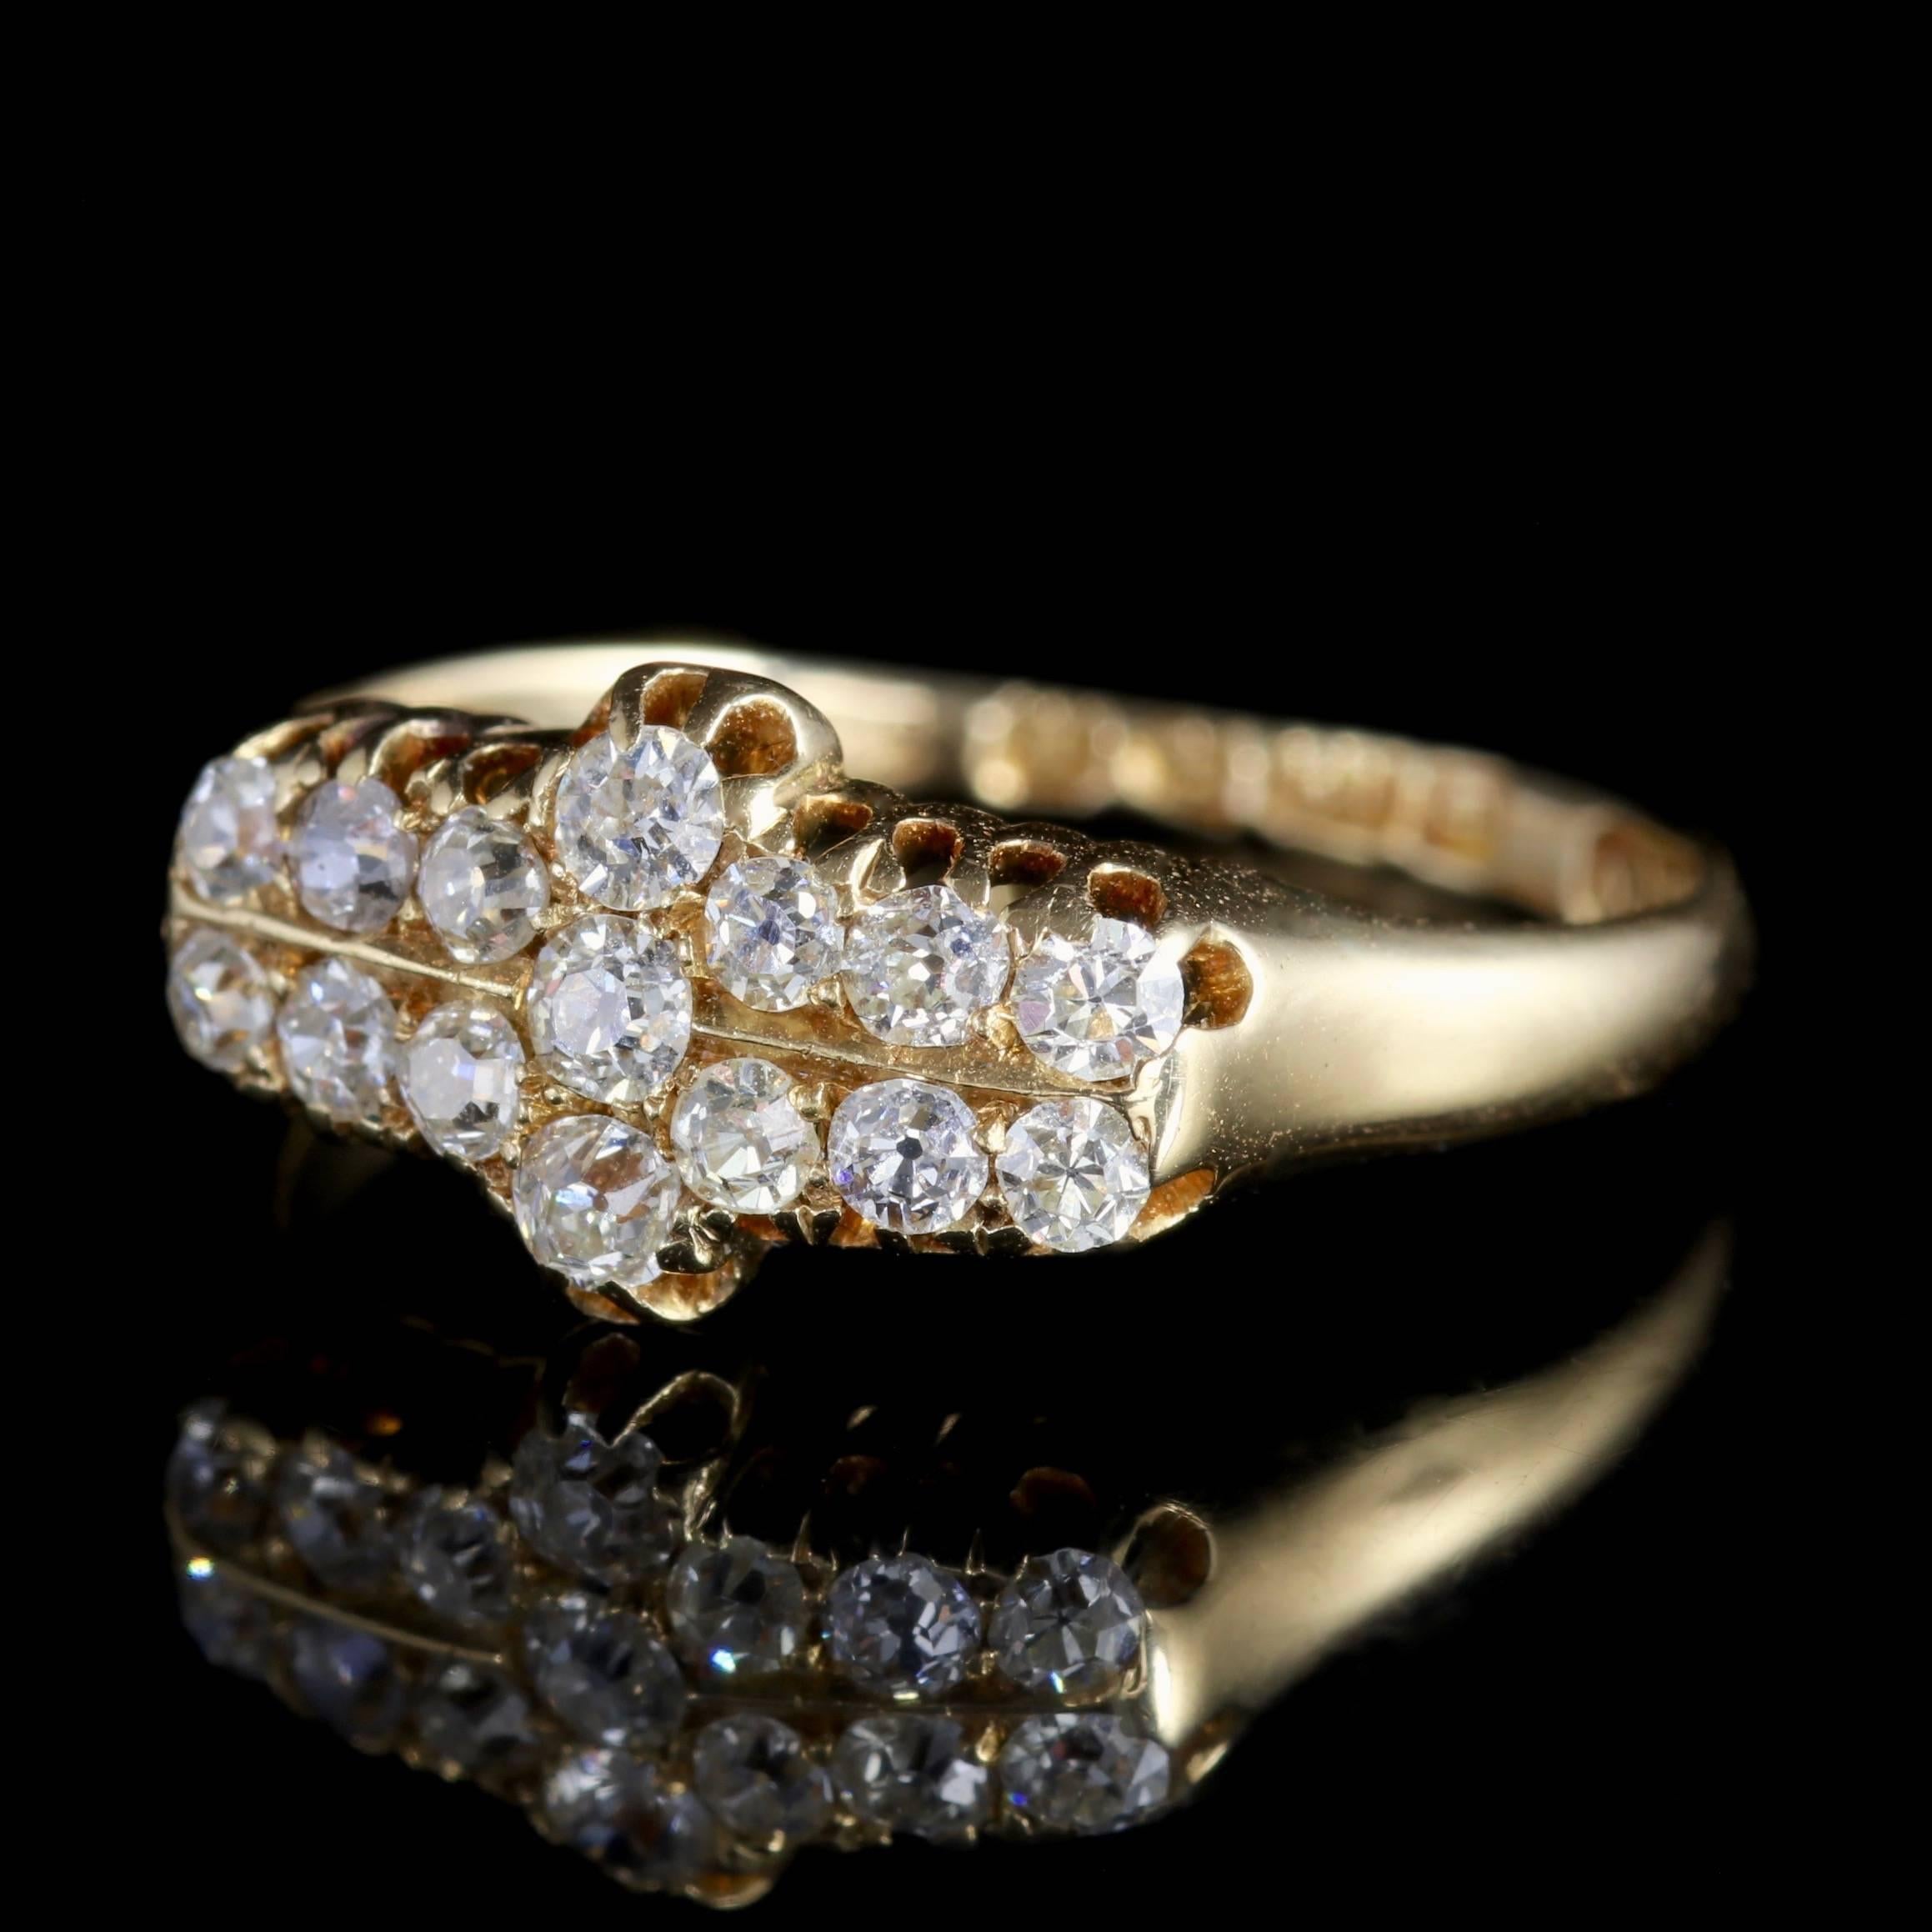 This fabulous antique Edwardian 18ct Yellow Gold ring boasts a gallery of sparkling Old cushion Cut Diamonds.

Diamond is the hardest mineral on Earth and this combined with its exceptional lustre and brilliant fire has made it the most highly